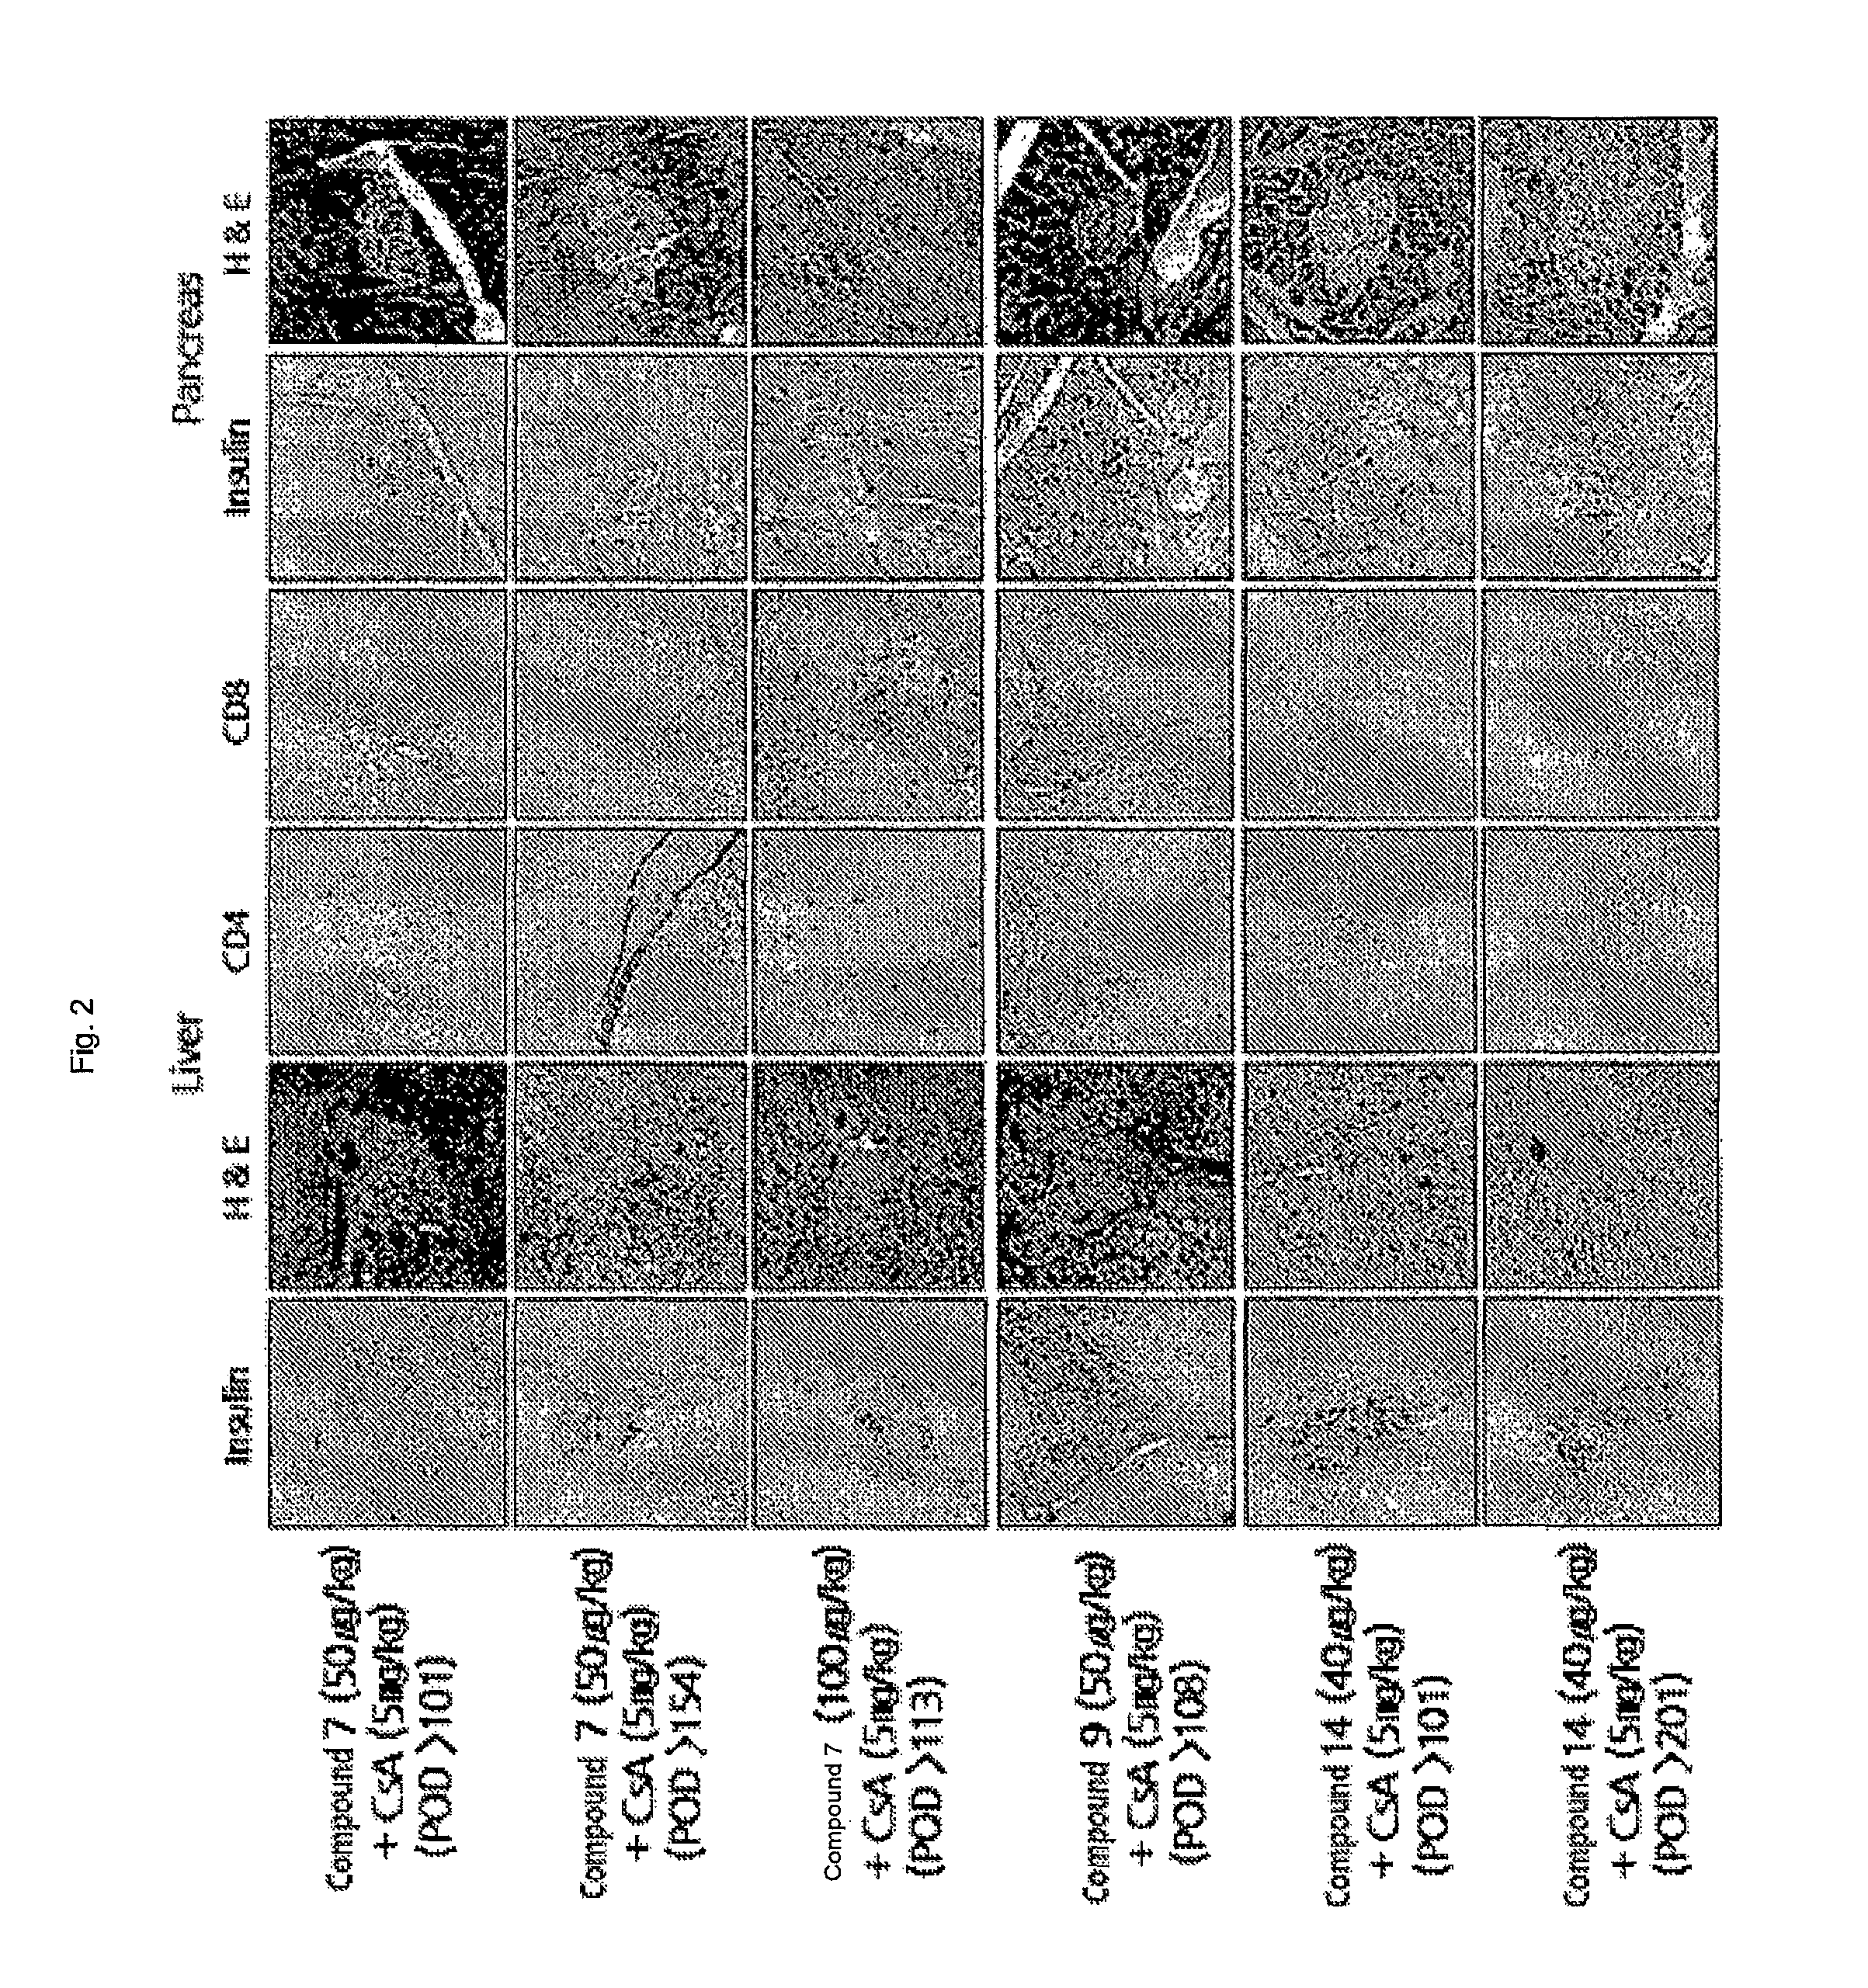 Colchicine derivatives or pharmaceutically acceptable salts thereof, method for preparing said derivatives, and pharmaceutical composition comprising said derivatives